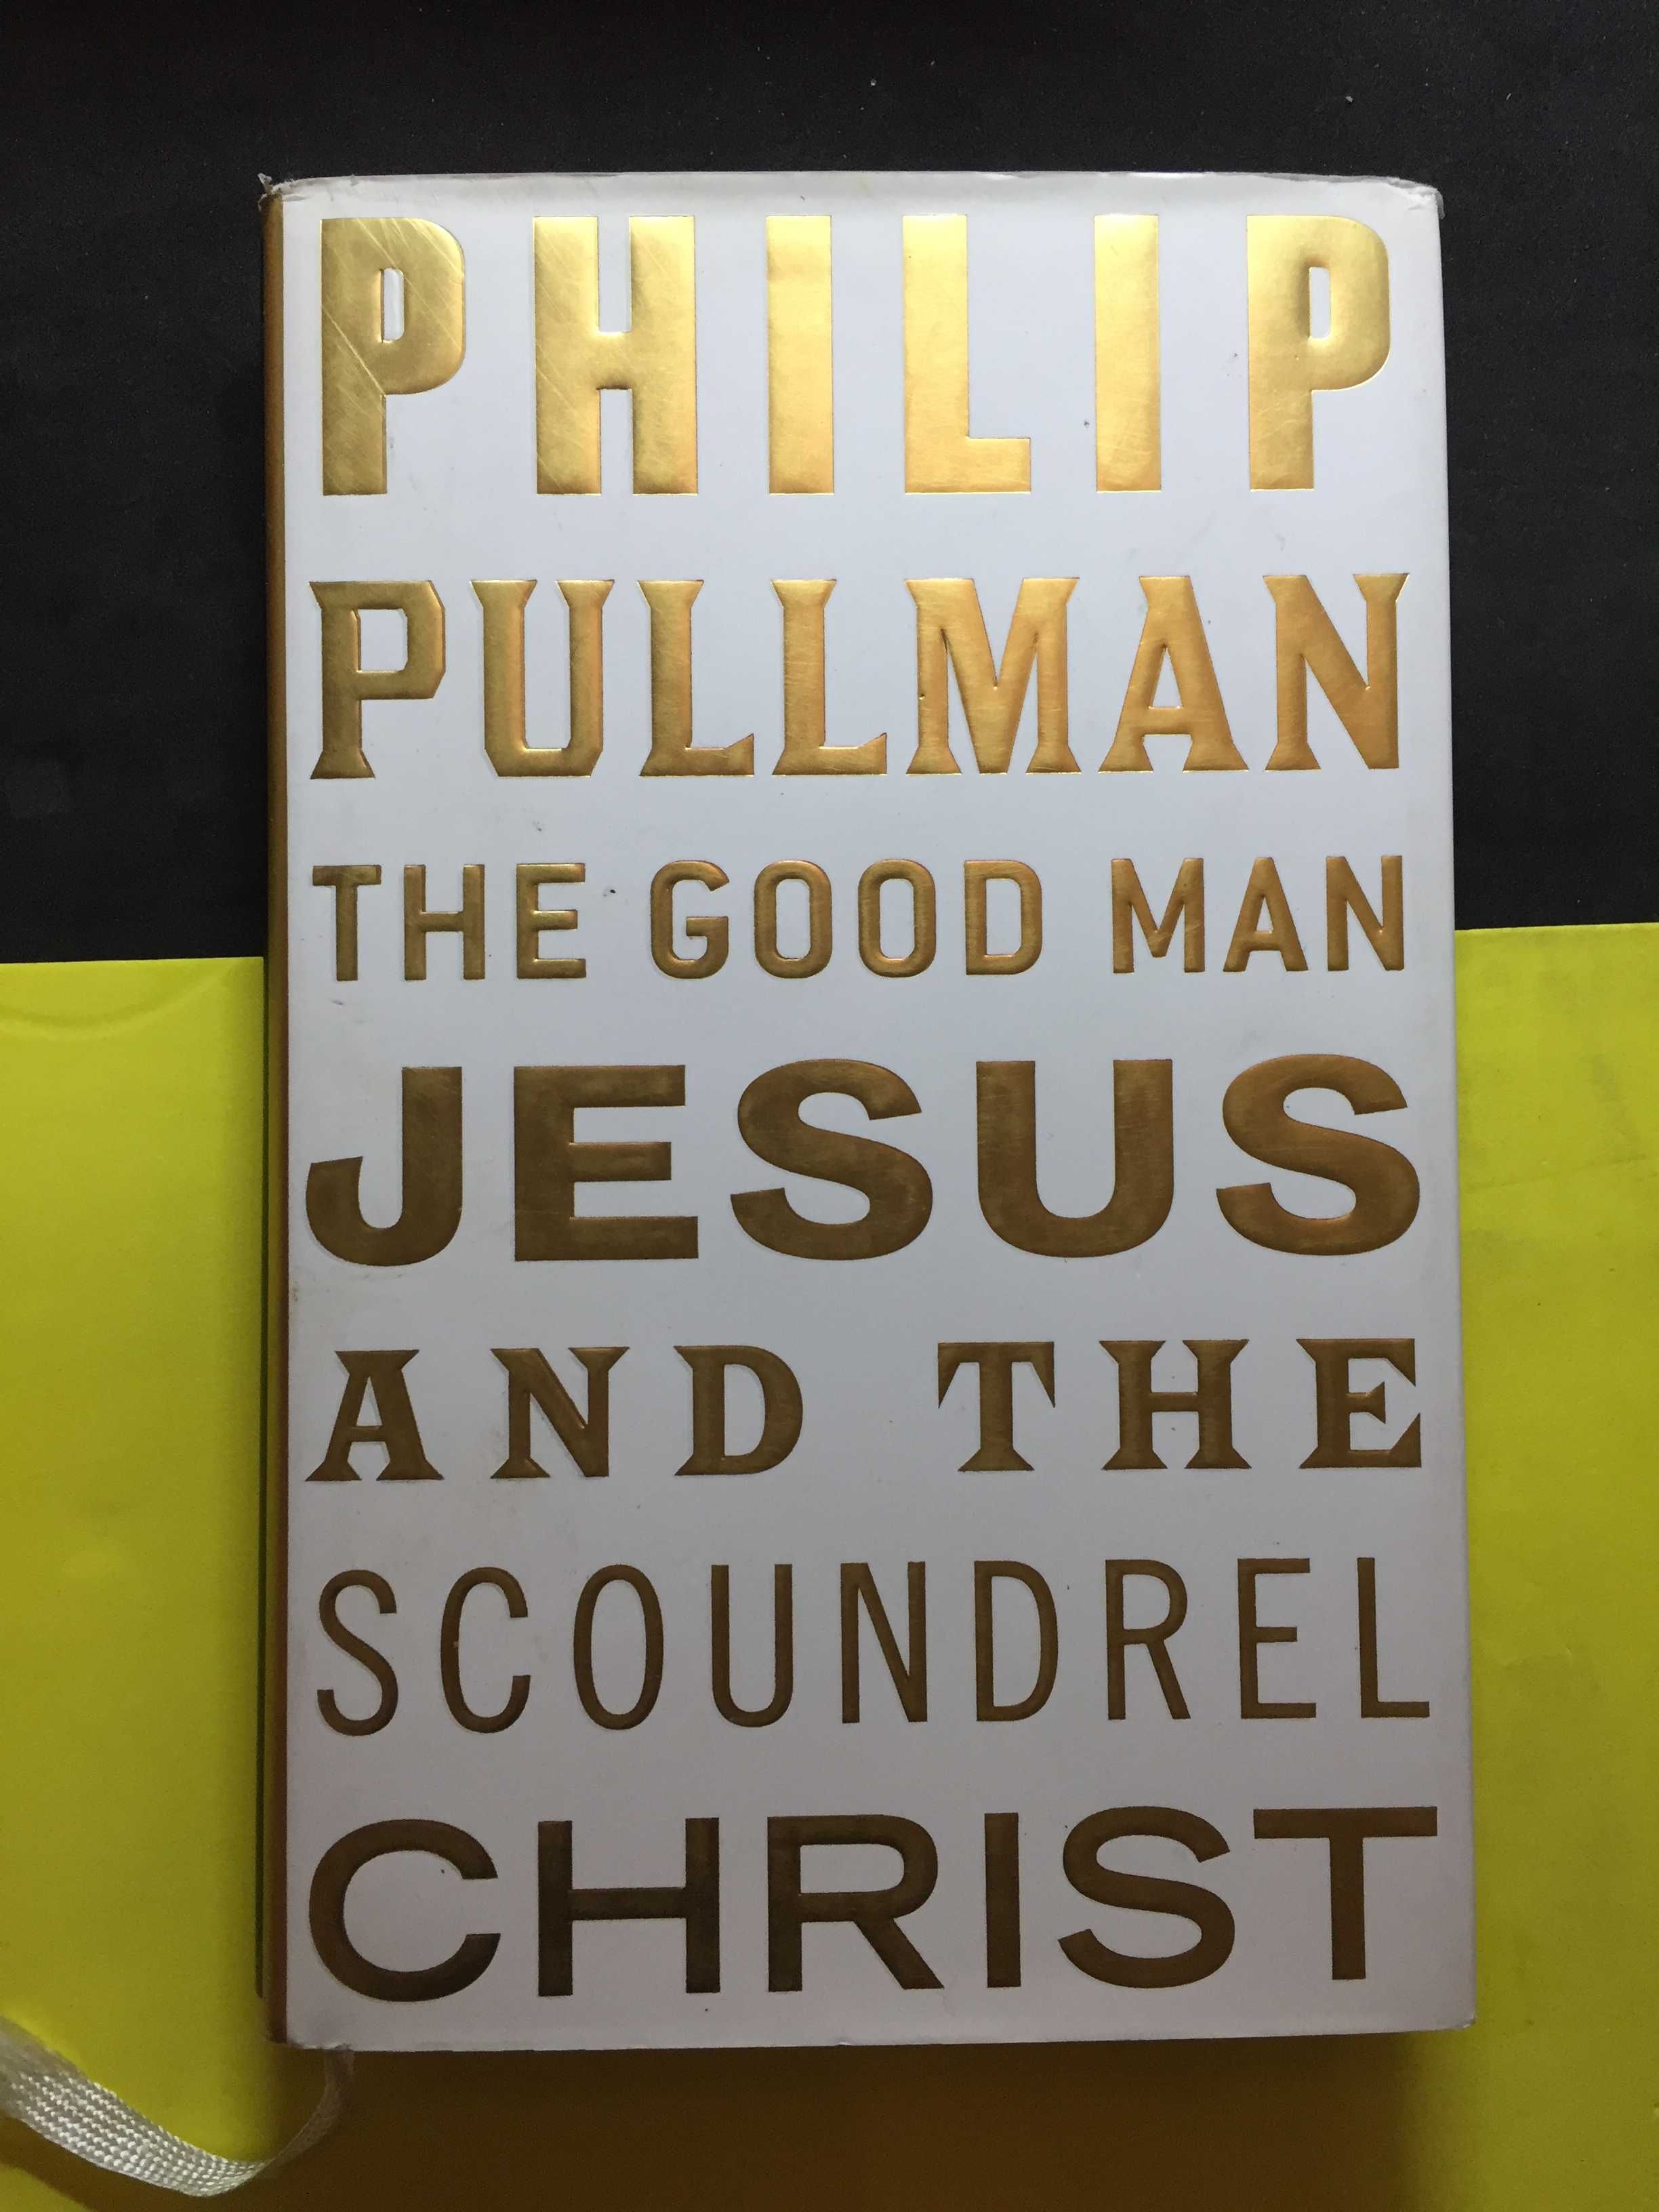 Philip Pullman, The Good Man Jesus and the Scoundrel Christ